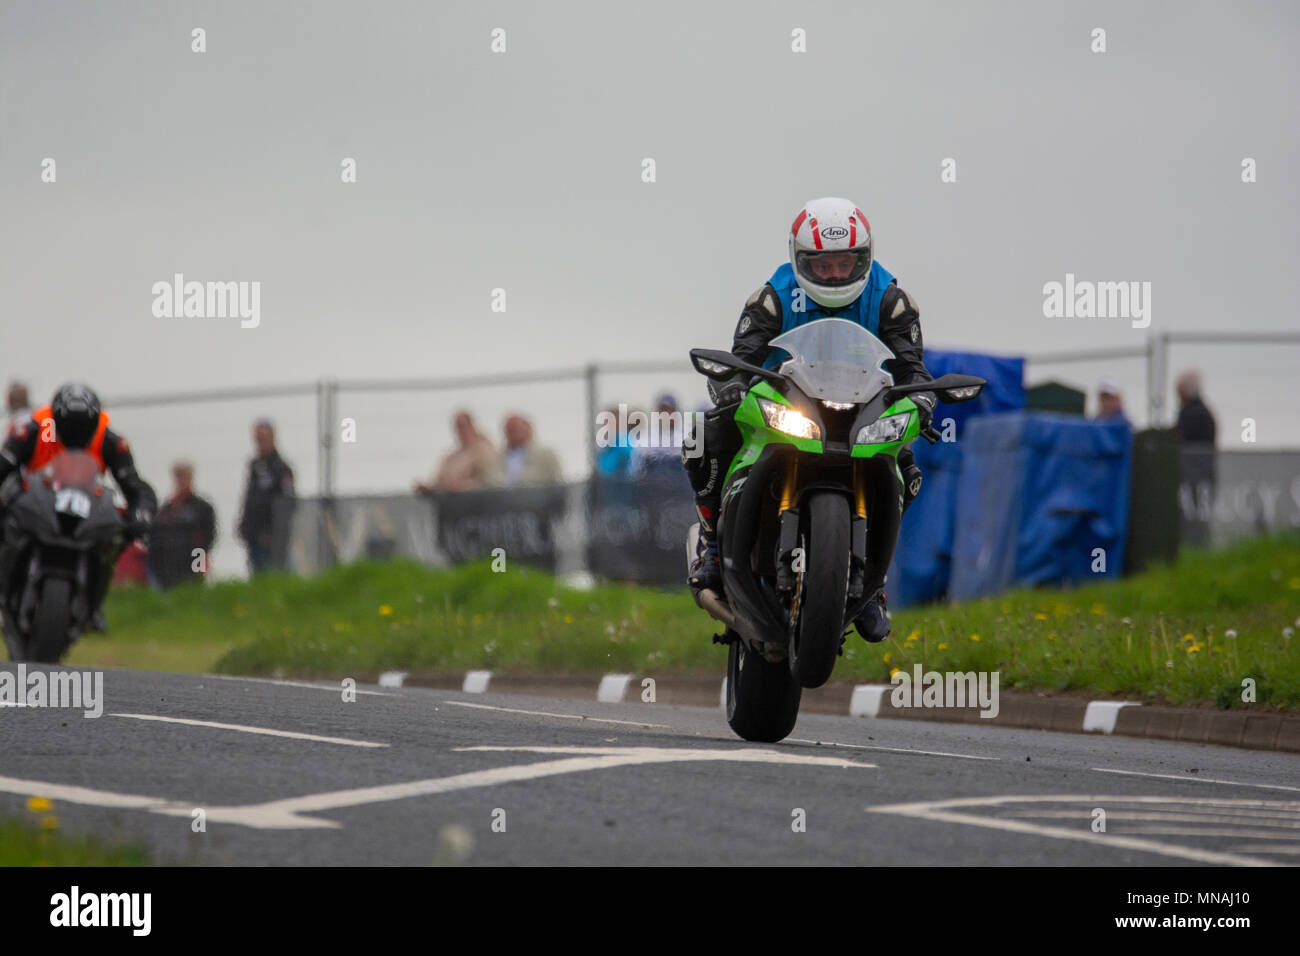 Portrush Northern Ireland. Tuesday 15th May 2018.Race Practice for NW 200. Inexperienced riders must wear an orange bib to alert other riders of their unfamilarity with the course. In practice session 1 new riders learn the course following a more experienced competitor who is wearin a blue vest. Credit: Brian Wilkinson/Alamy Live News Stock Photo